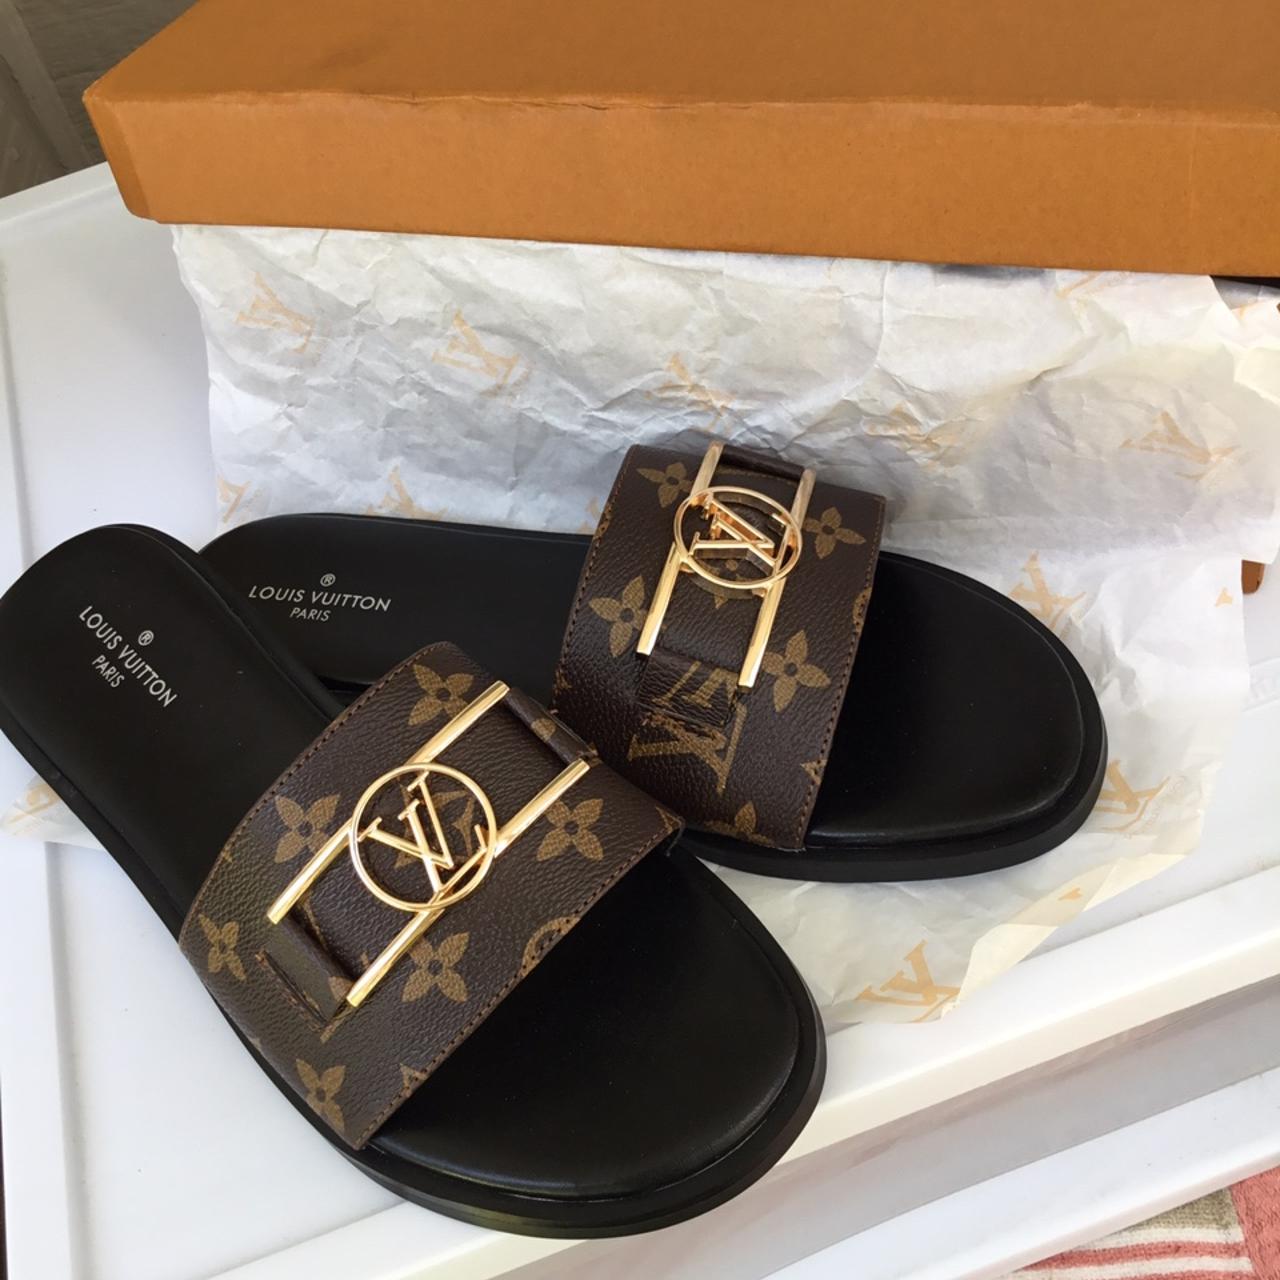 Lv sandal so cute got as a gift but not my size nor - Depop